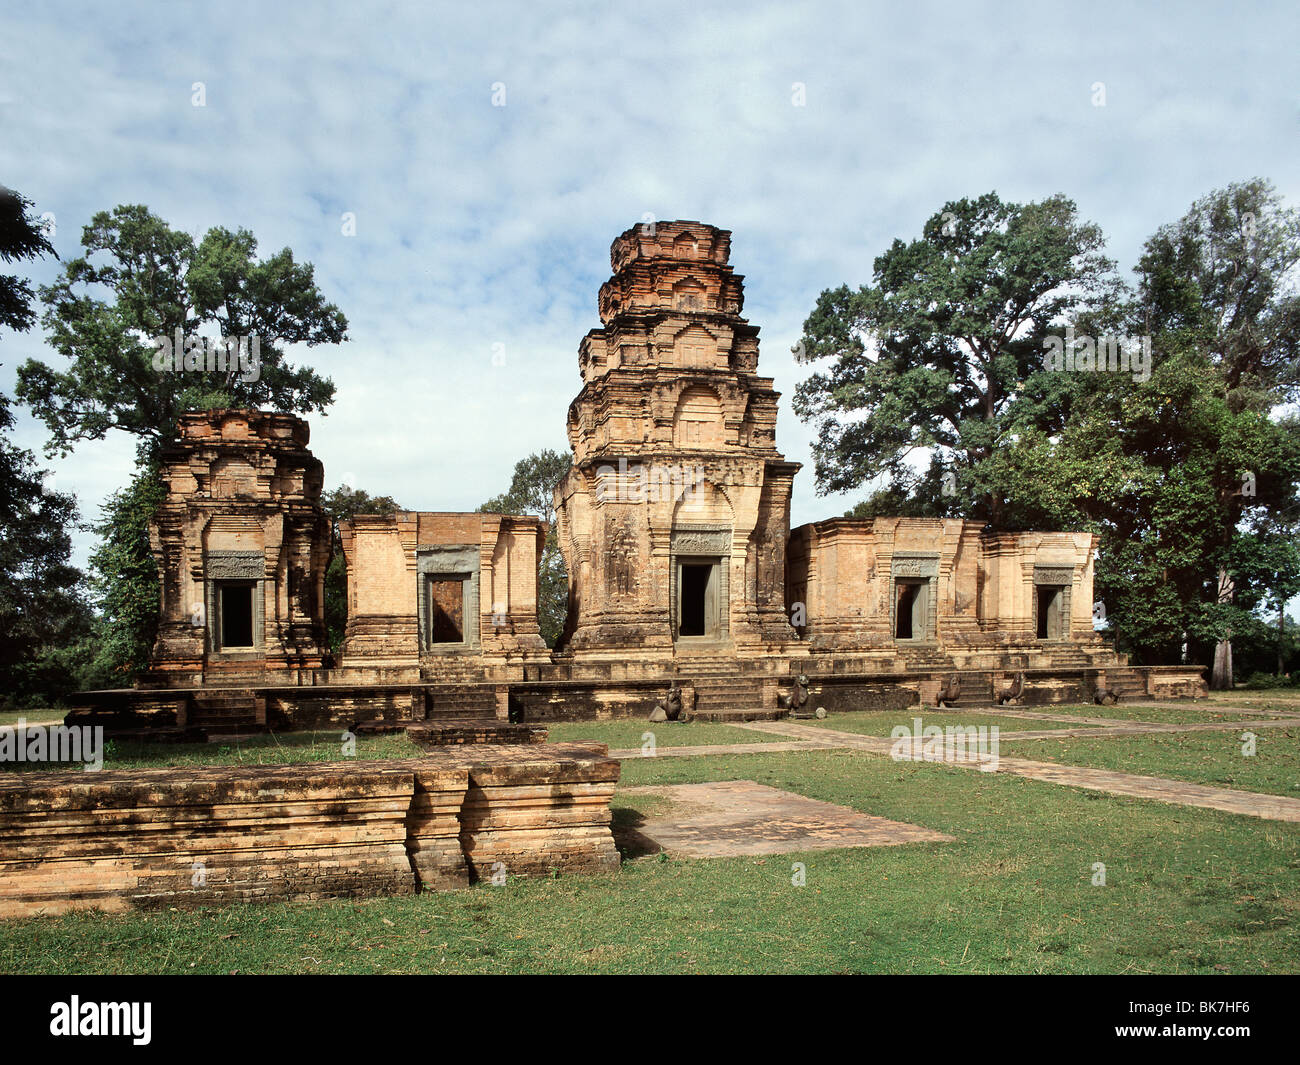 Prasat Kravan, dating from the early 10th century, Angkor, UNESCO World Heritage Site, Cambodia, Indochina, Southeast Asia, Asia Stock Photo